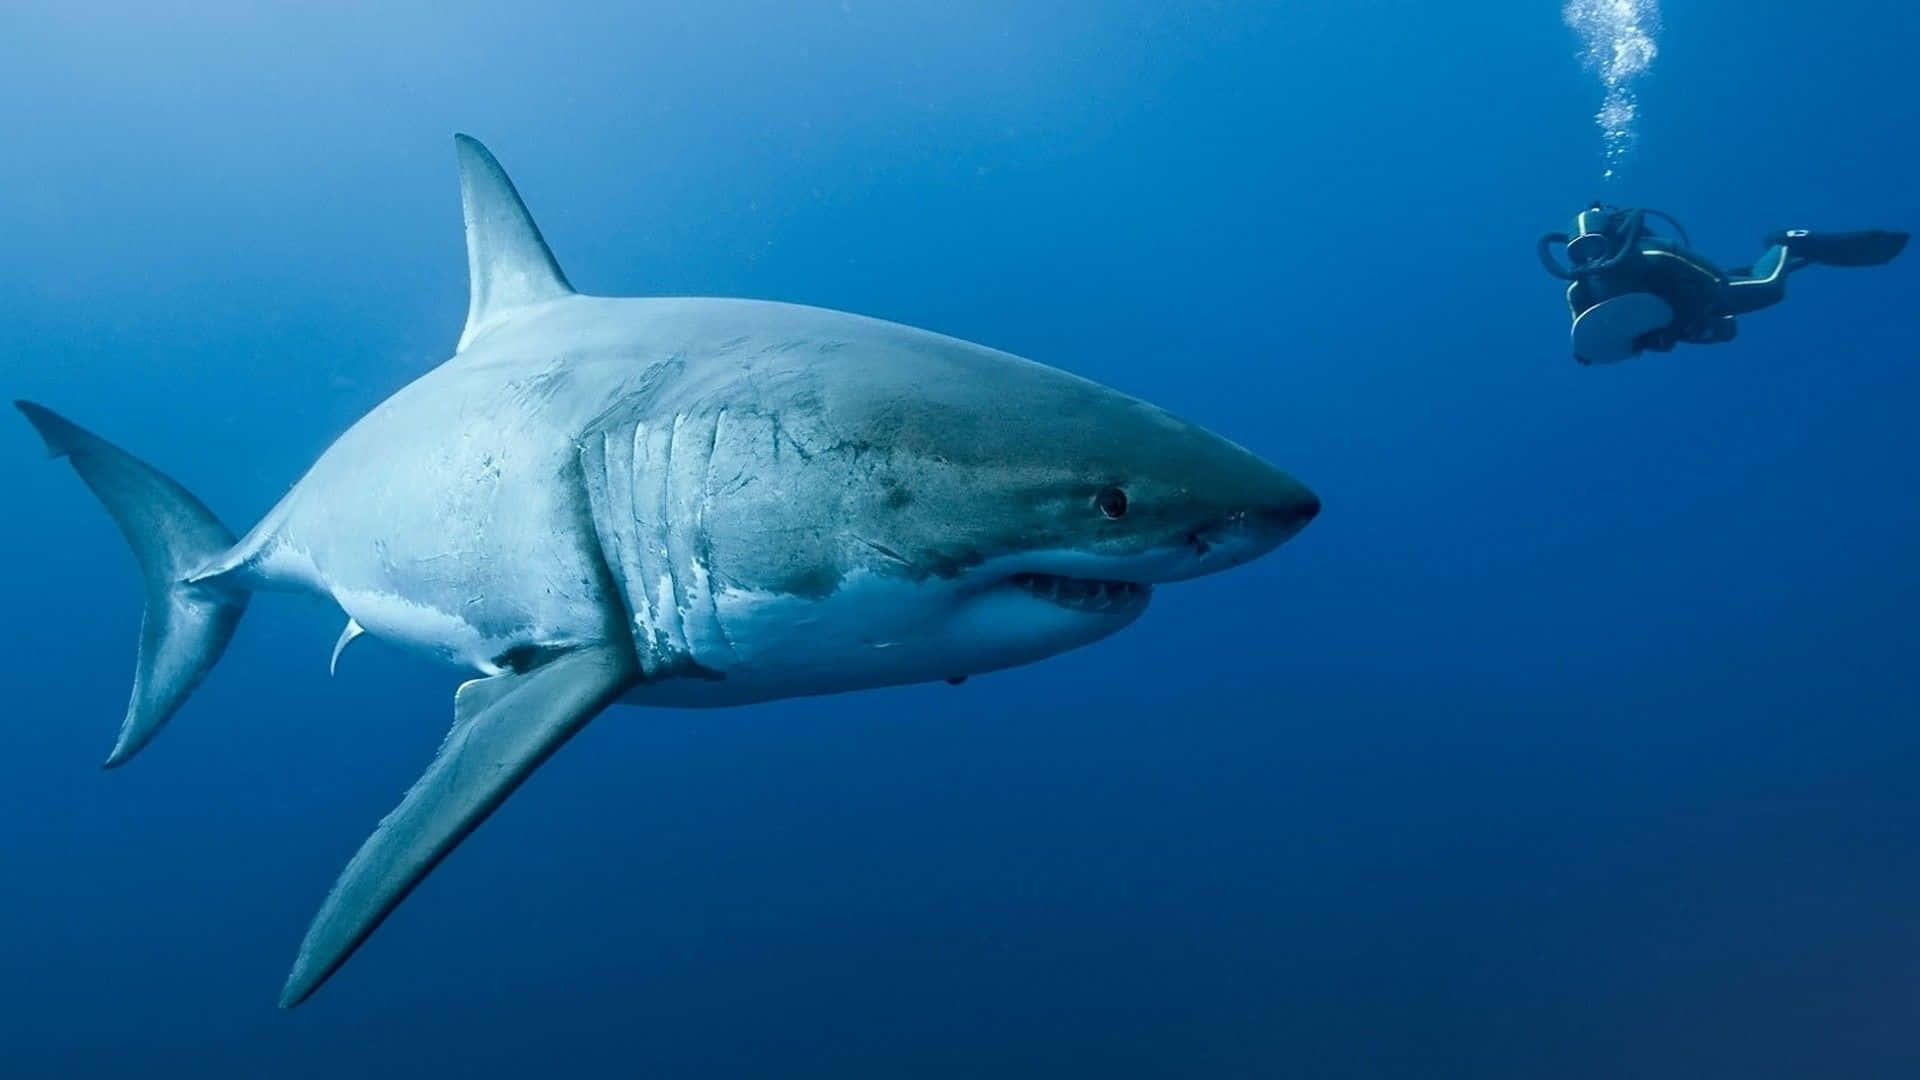 A Diver Is Swimming Next To A Great White Shark